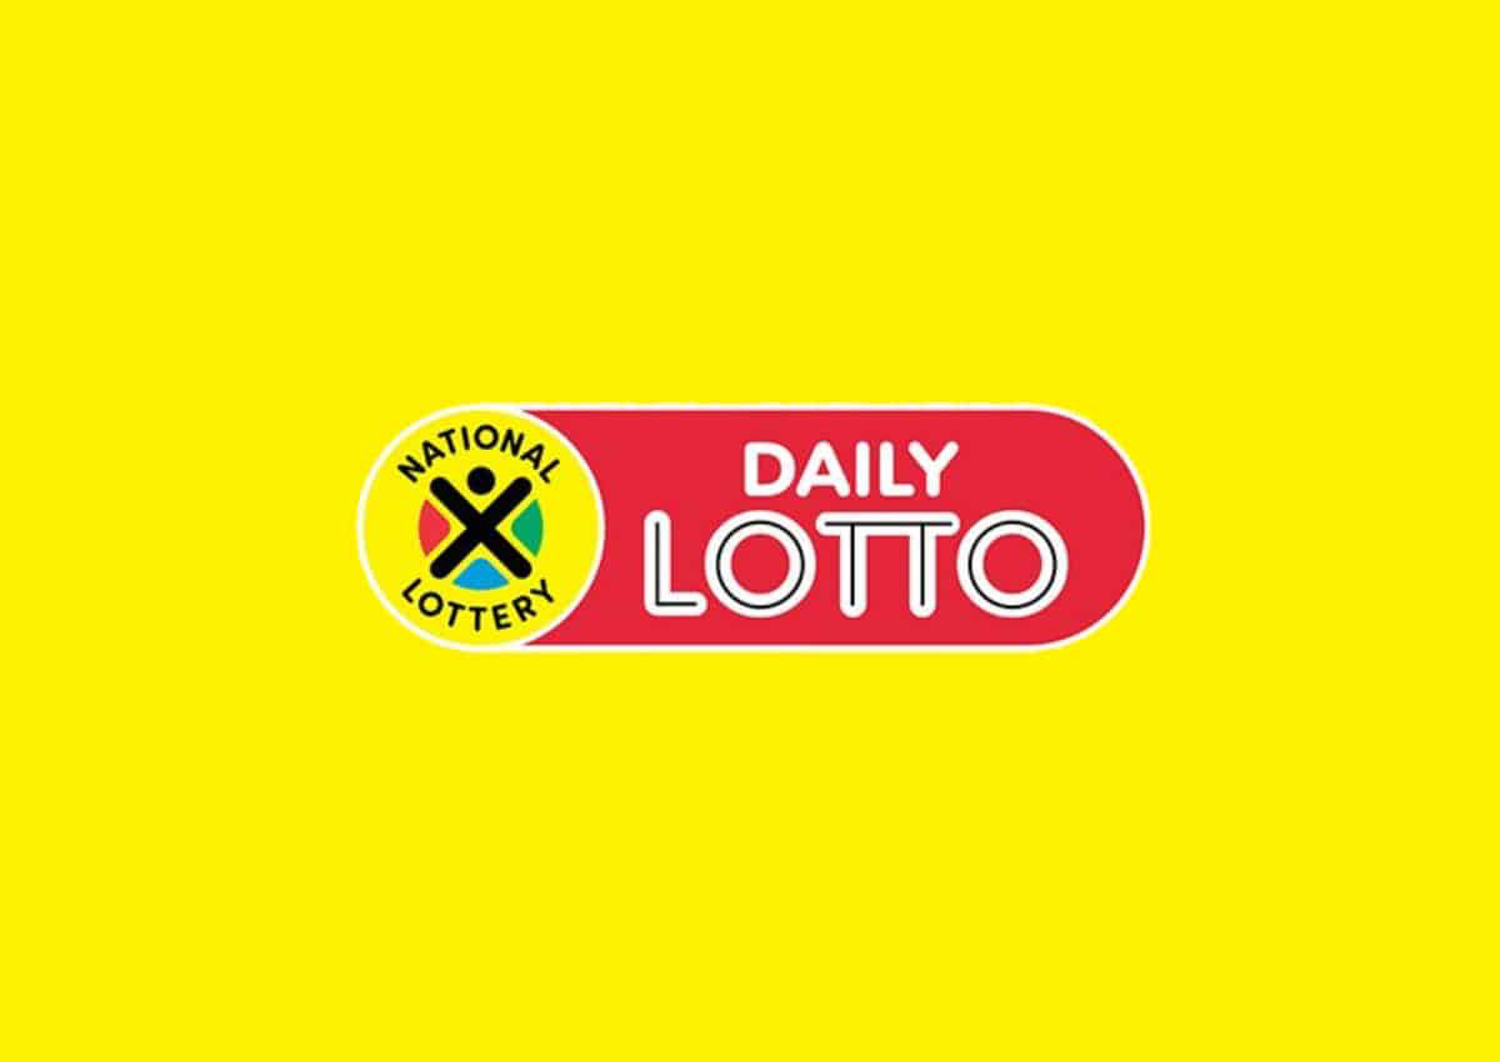 tonight's lotto results